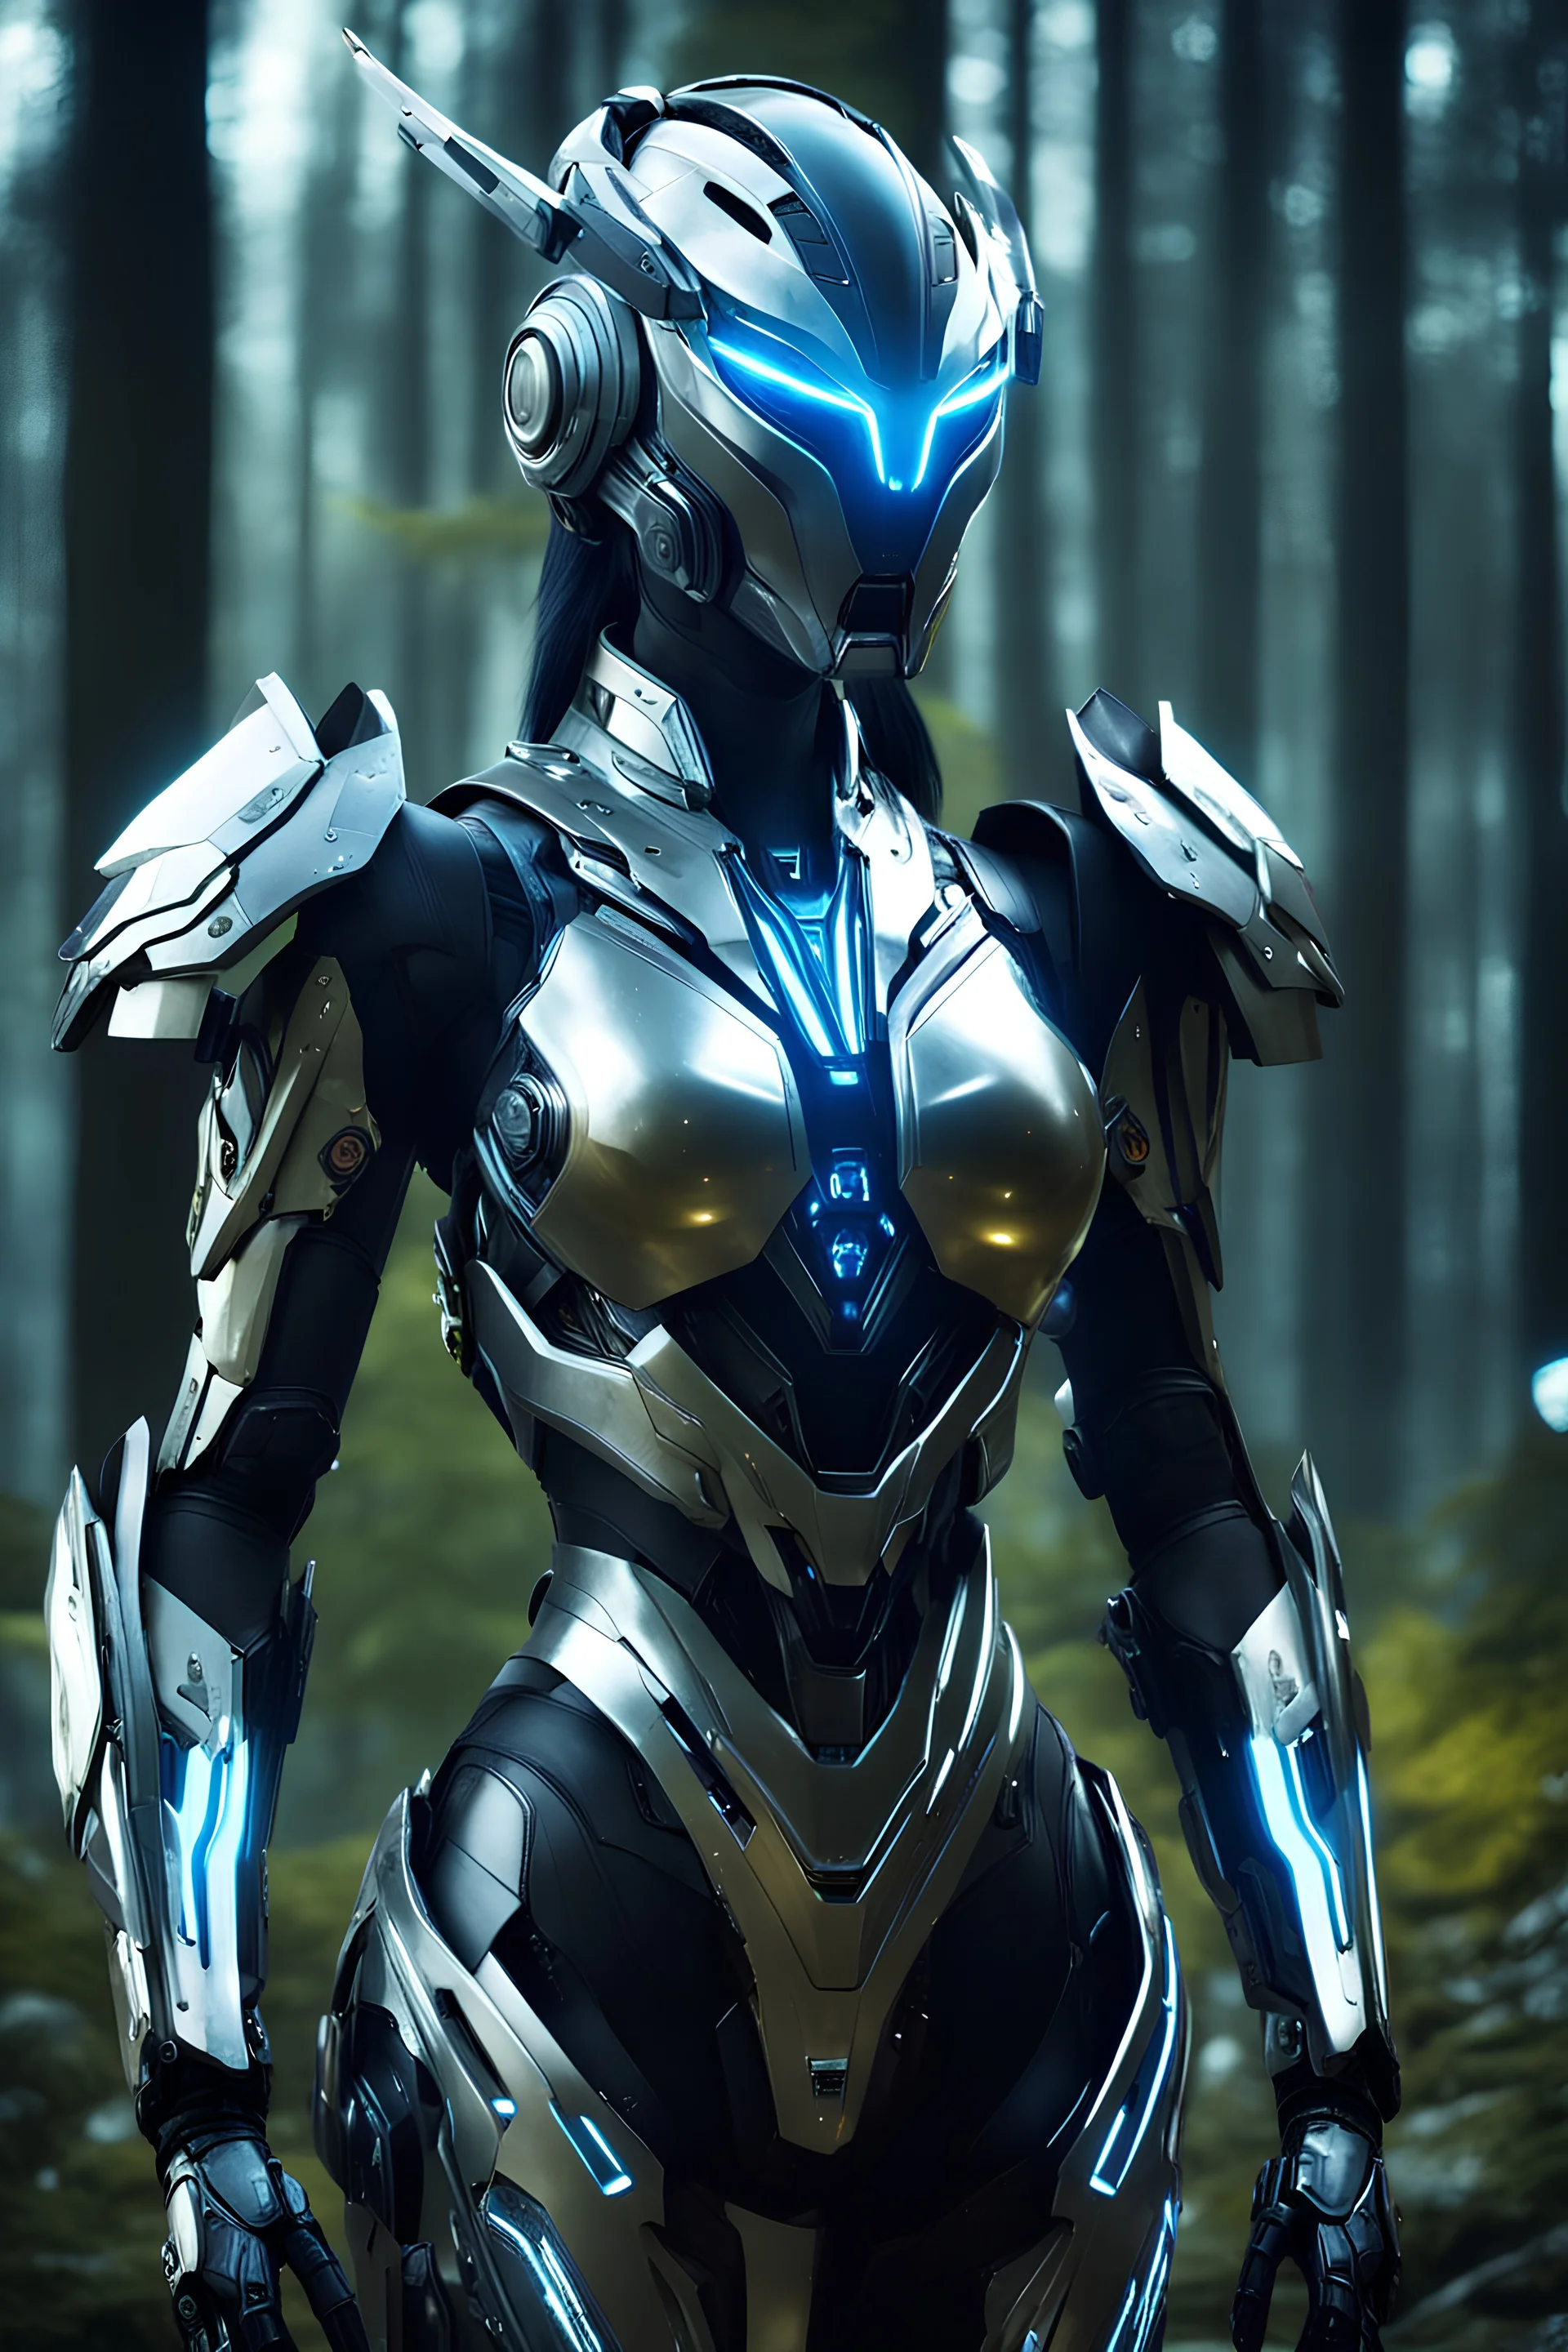 Facing Front view night Photography Ultra Realistic High Details,Natural Beauty,Beautiful Angel Pretty woman cyborg mecha cybernetic futuristic warframe armor metallic chrome,Helmet futuristic,in Magical Forest,full of lights colors,glowing in the dark, Photography Art Photoshoot Art Cinematic,Soft Blur Colors, sci-fi concept art